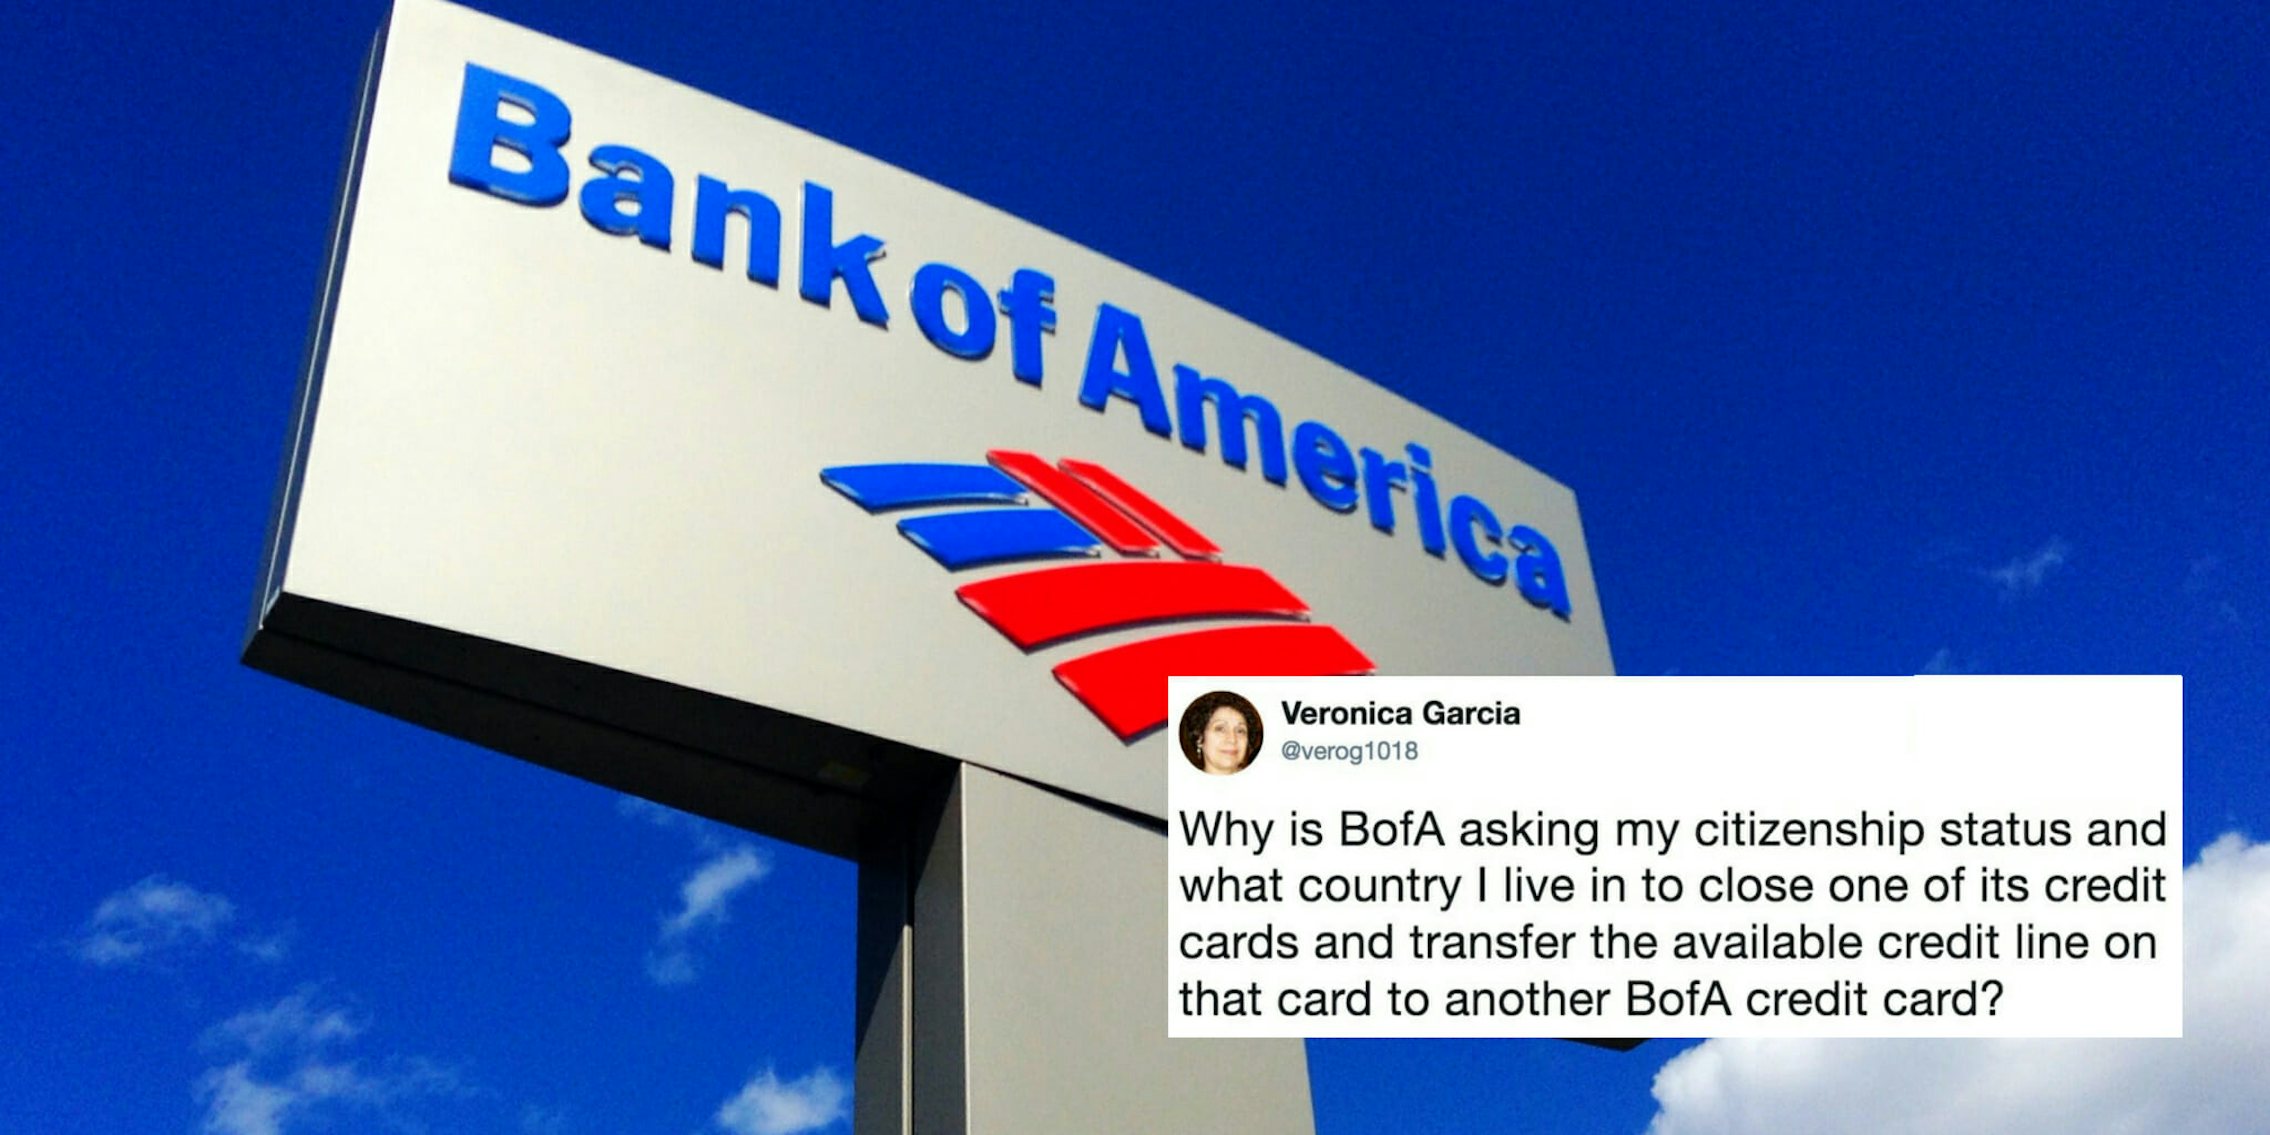 Bank of America is asking about customers' citizenship statuses.